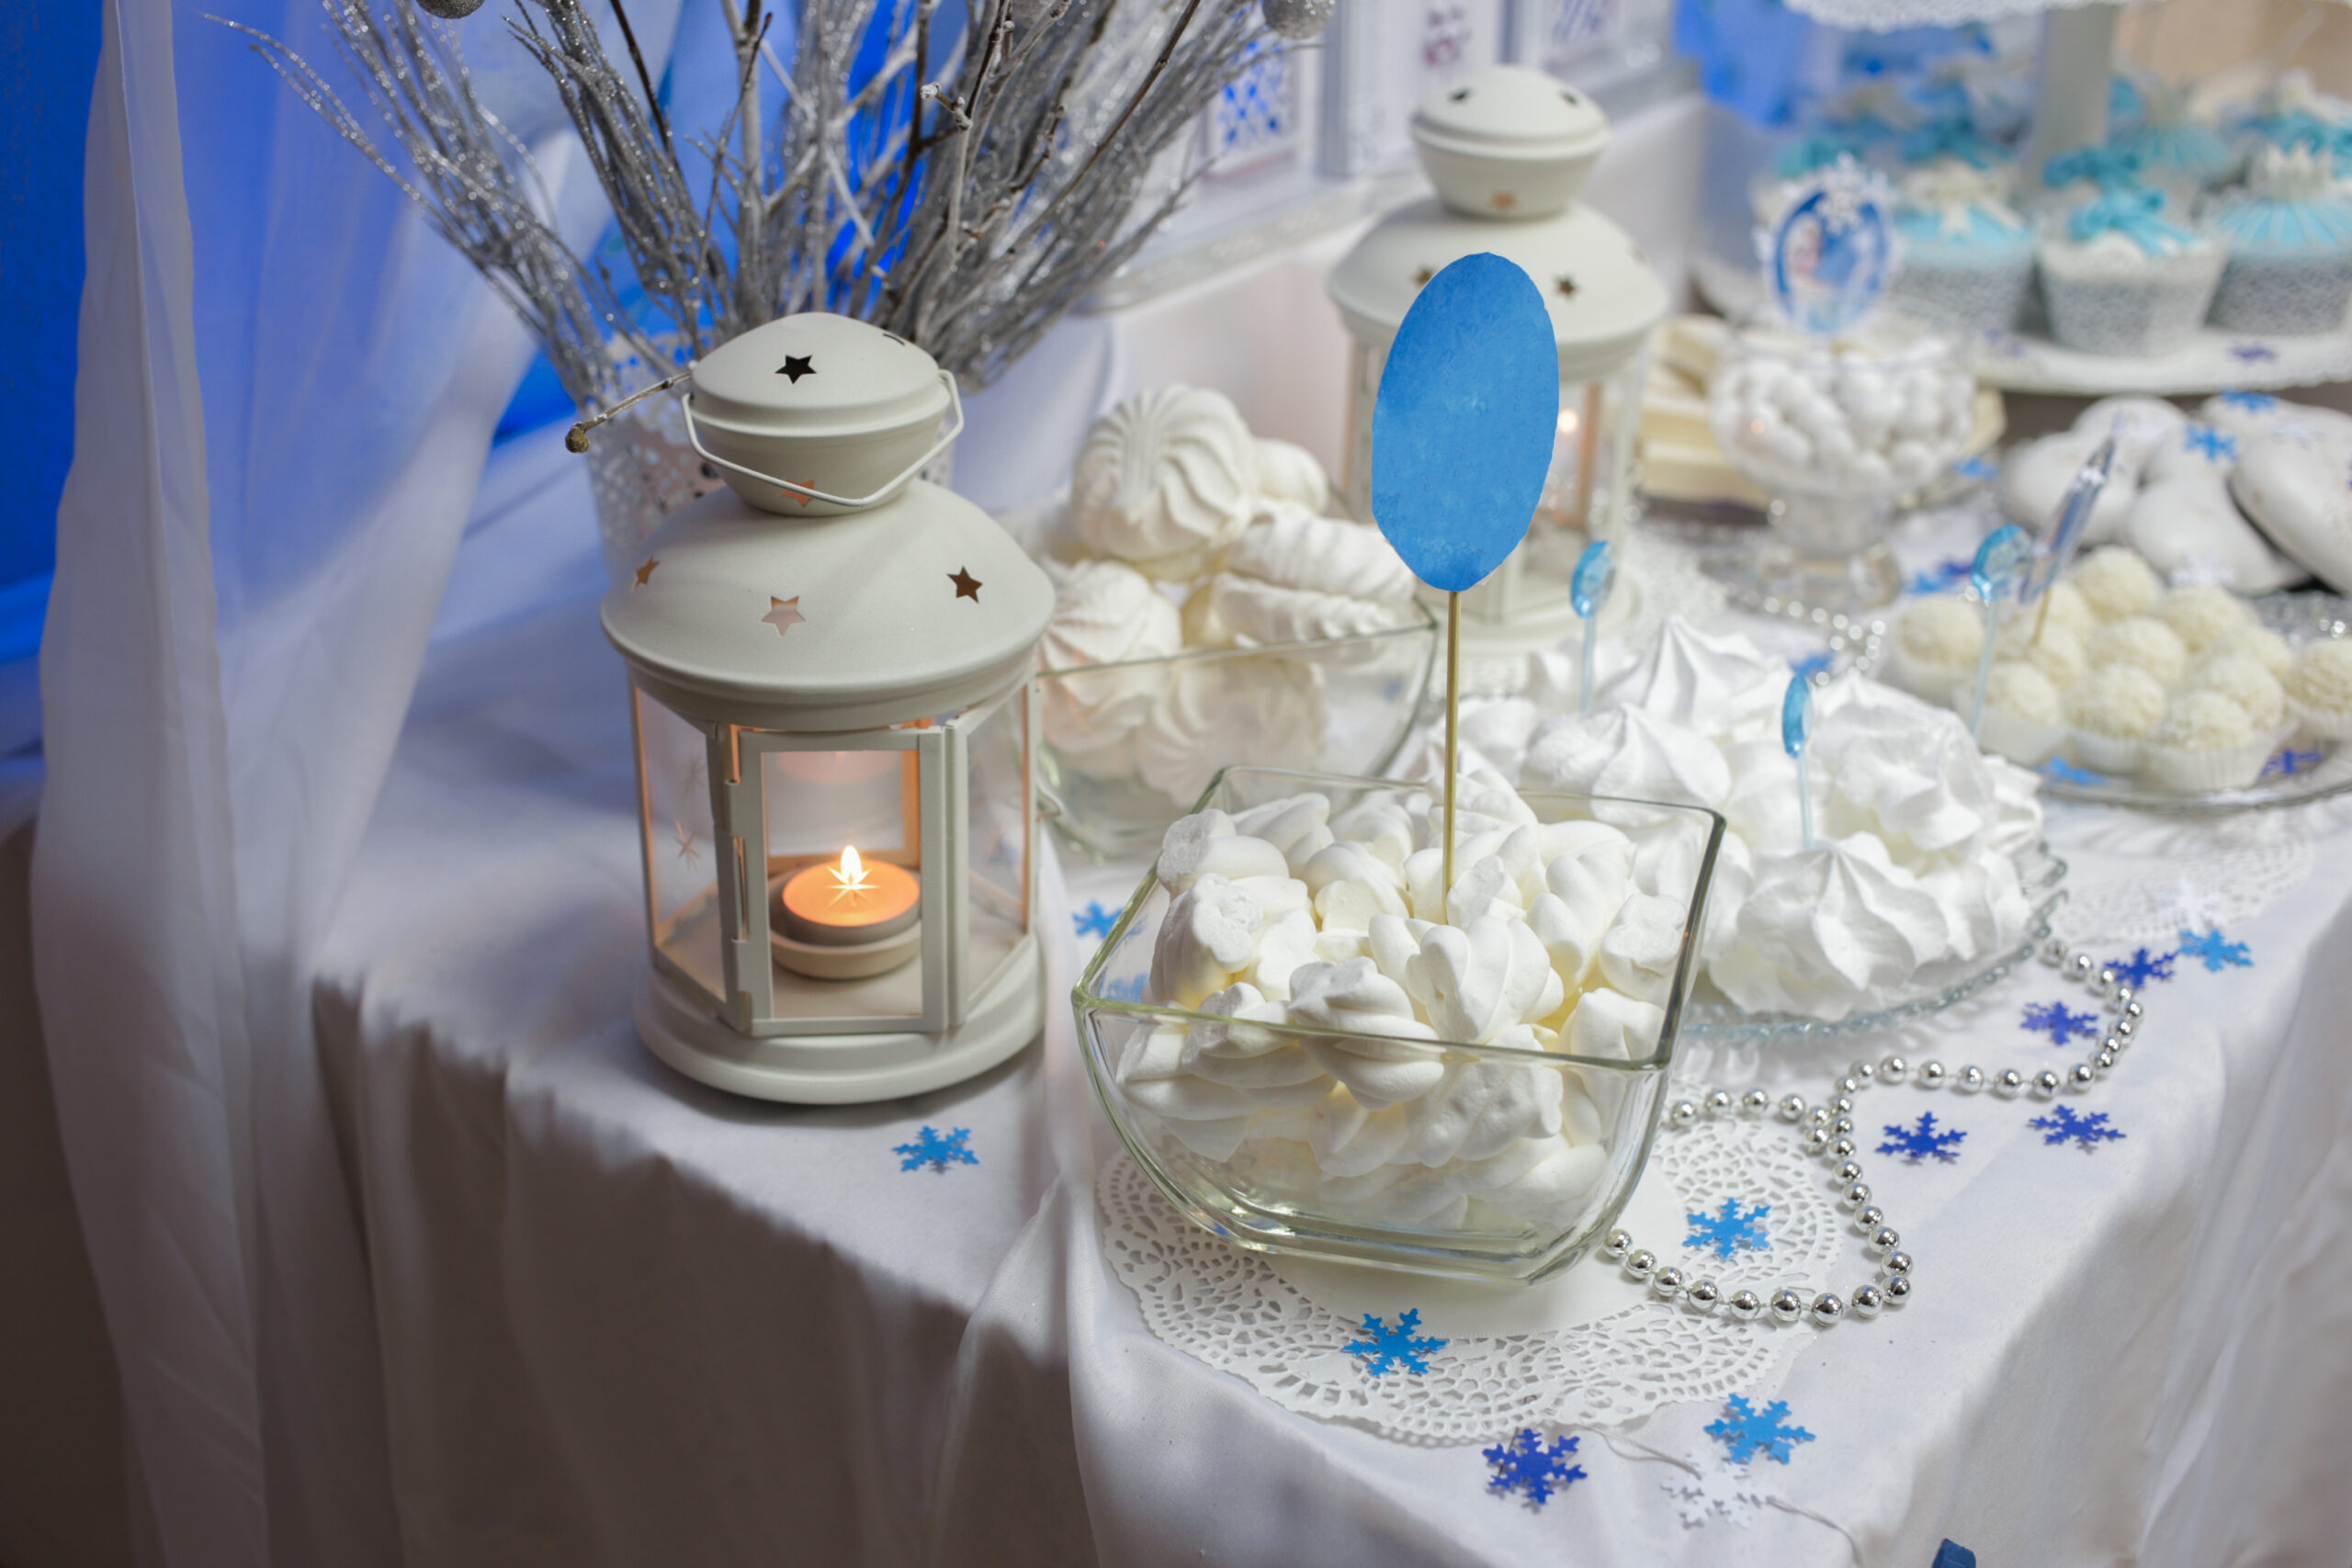 Festive table with sweets in a white color scheme and lantern